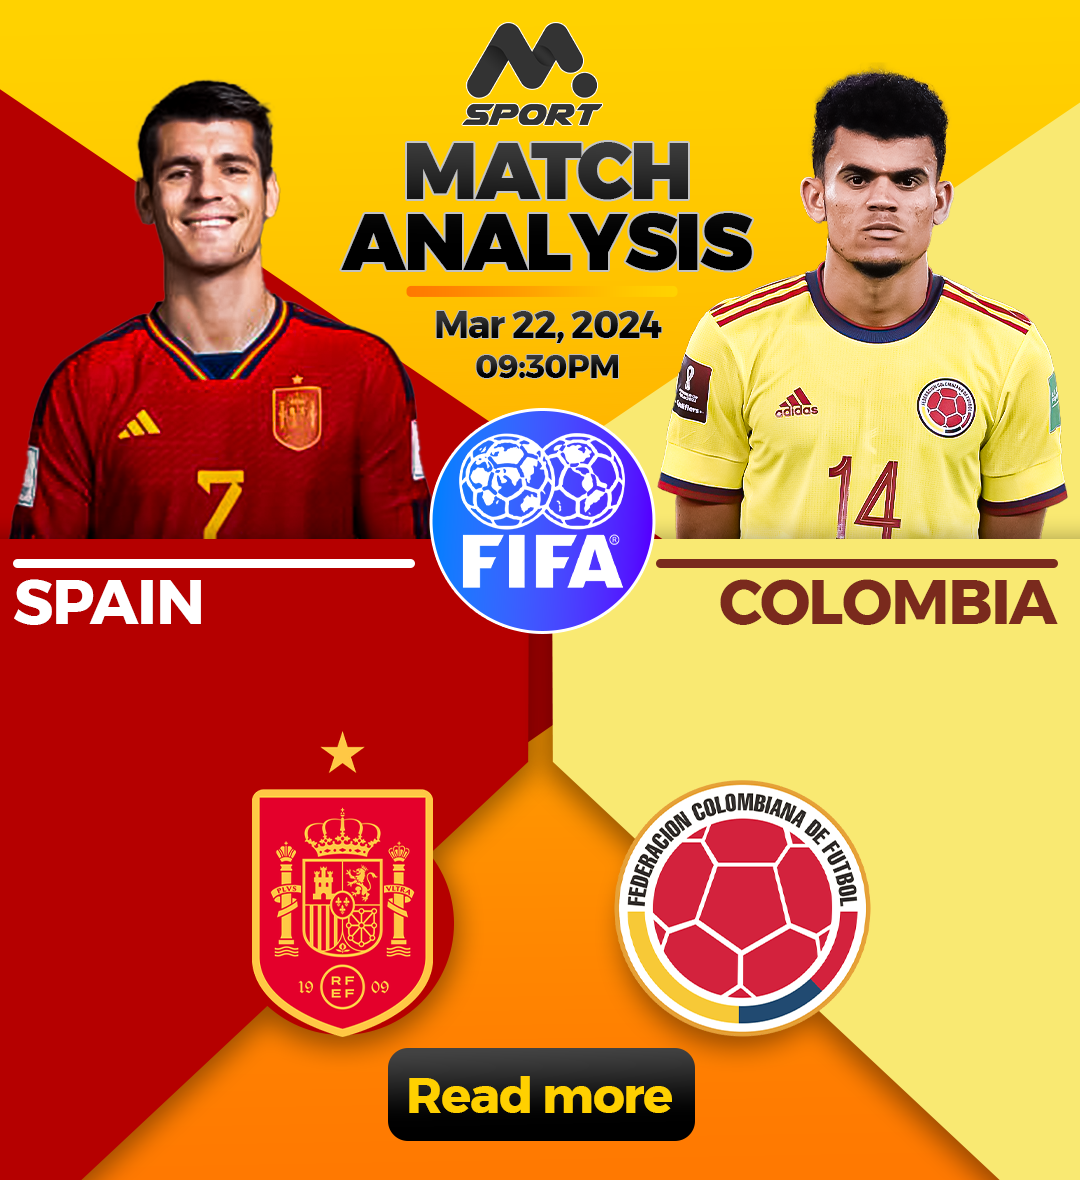 Spain vs Colombia: Who Wins This Pre Euros & Copa America Friendly Test Match?